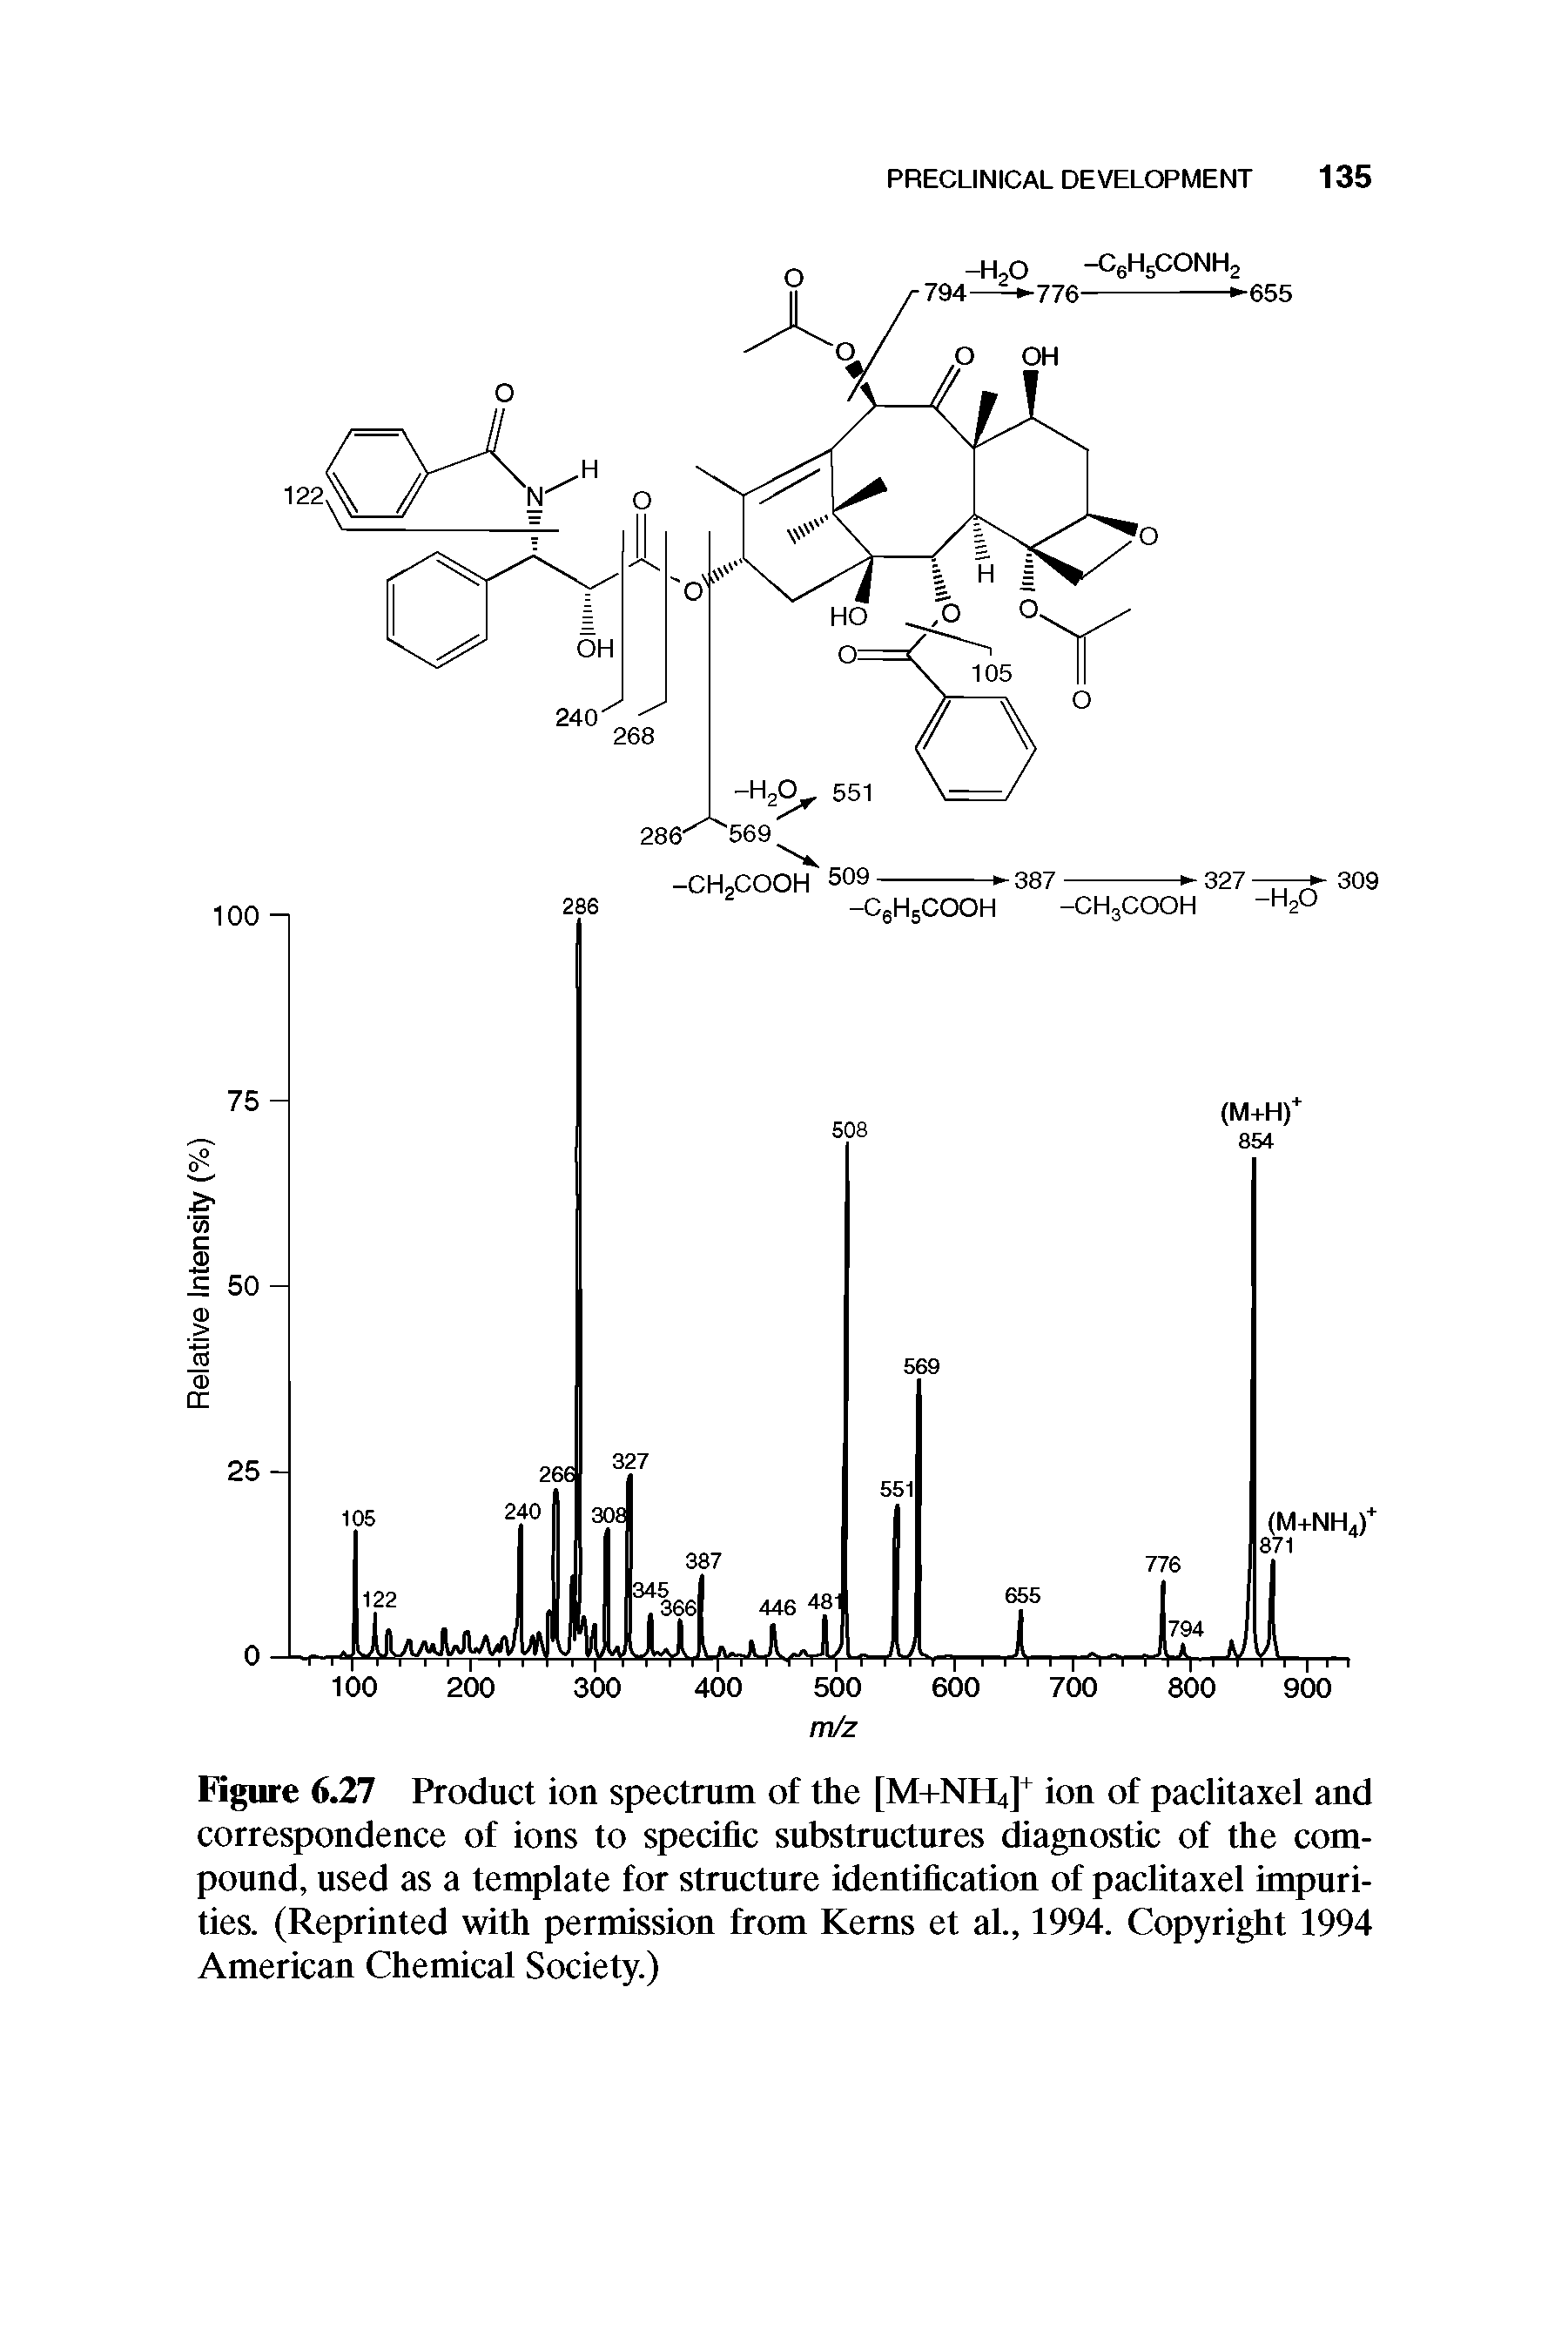 Figure 6.27 Product ion spectrum of the [M+NFL ion of paclitaxel and correspondence of ions to specific substructures diagnostic of the compound, used as a template for structure identification of paclitaxel impurities. (Reprinted with permission from Kerns et al., 1994. Copyright 1994 American Chemical Society.)...